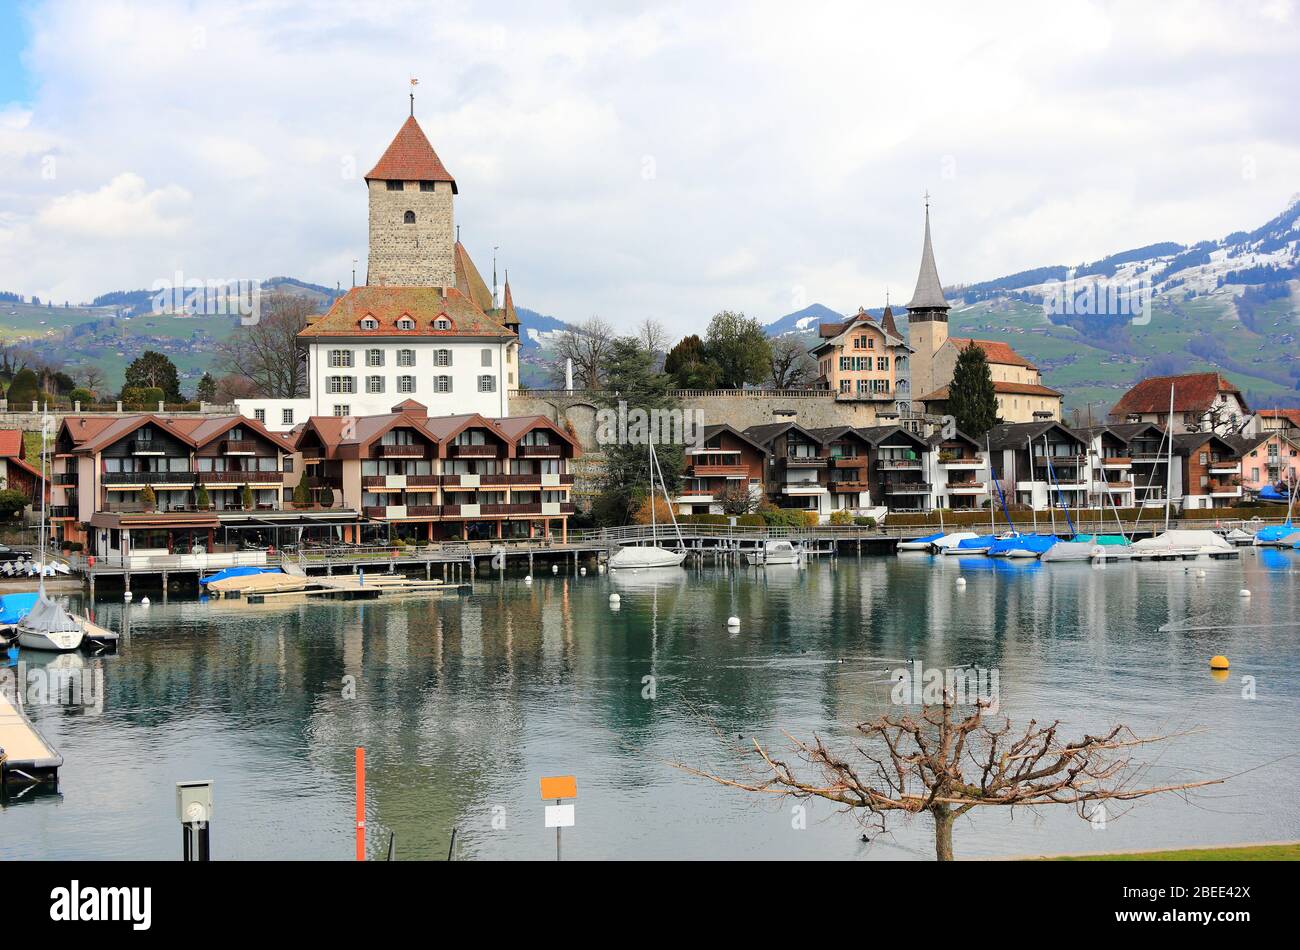 Spiez harbour, Spiez Castle and Lake Thun. The town is located on the southern shore of Lake Thun. Switzerland, Europe. Stock Photo